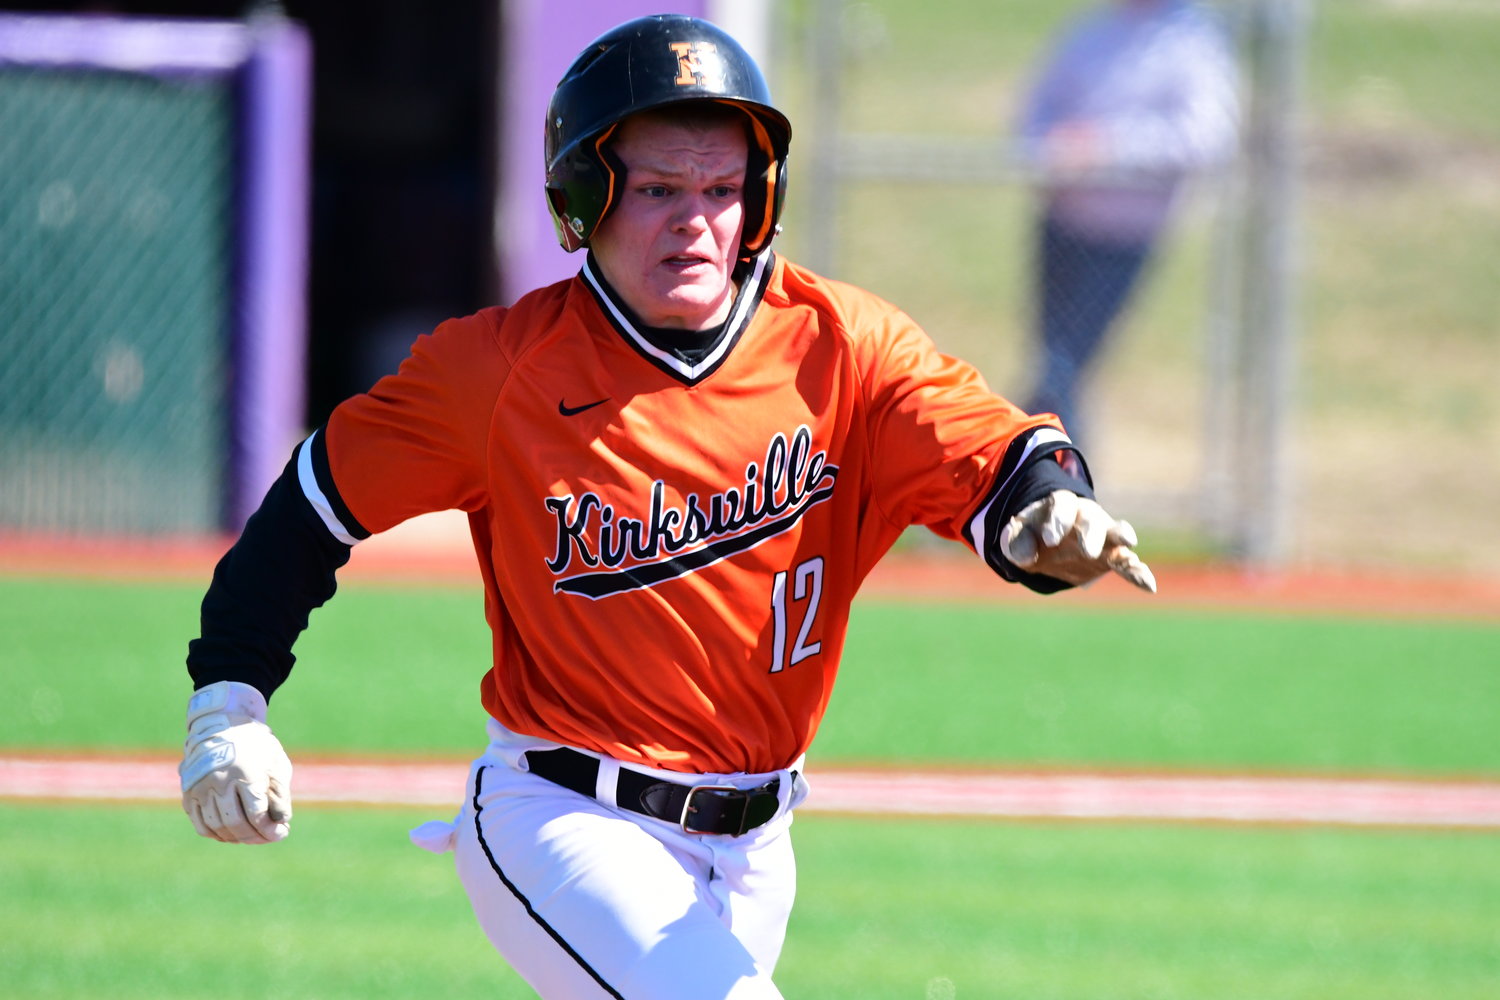 Photos from Kirksville’s 12-6 win over Knox County on Saturday, April 9, 2022, held at Bulldog Baseball Park on the campus of Truman State University.